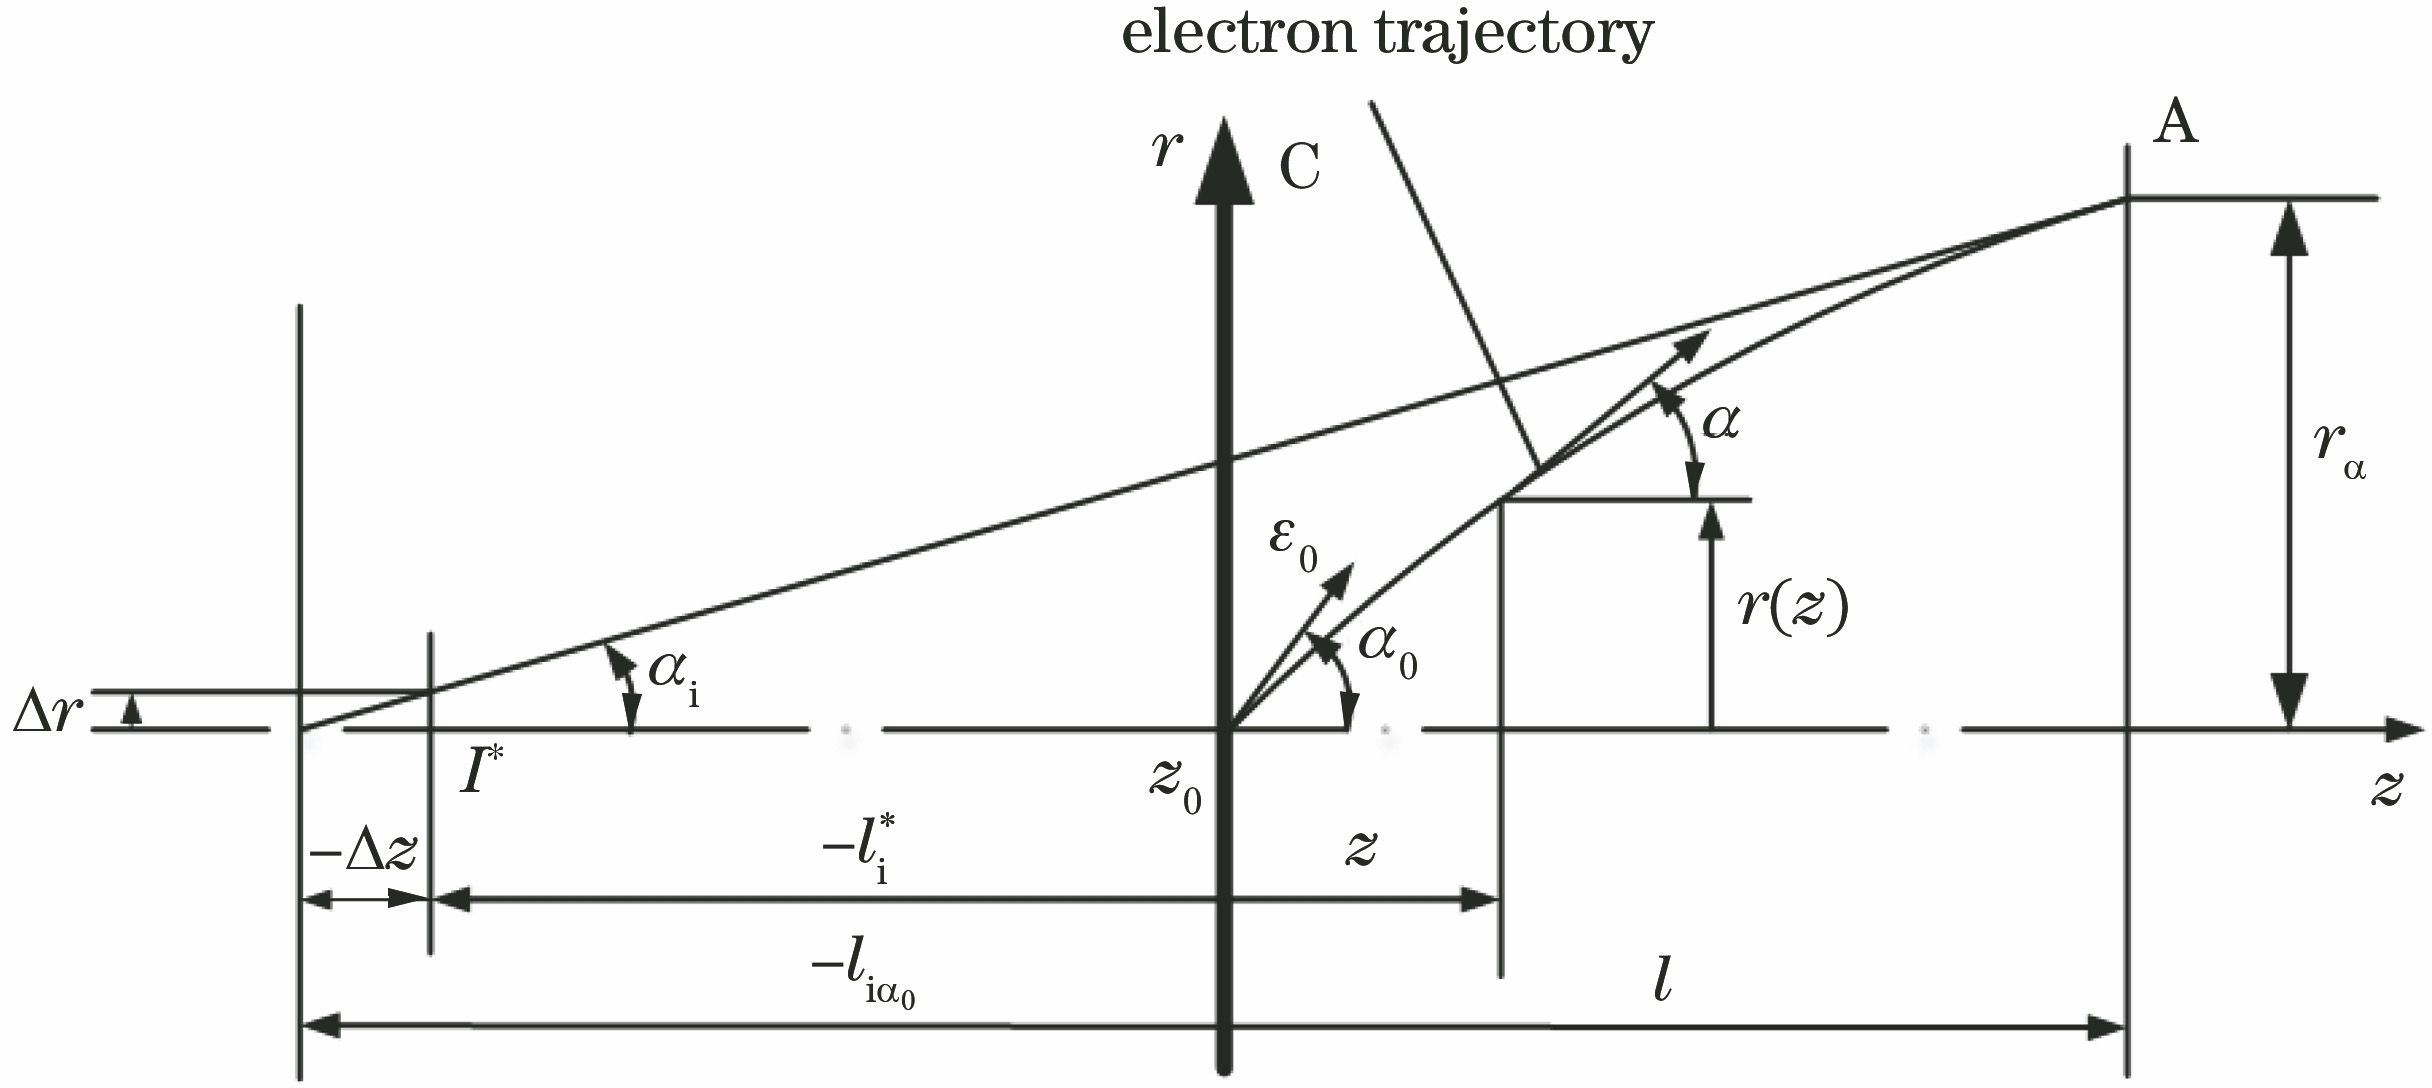 Electron trajectory and paraxial lateral chromatic aberration in proximity focusing system (n=1)